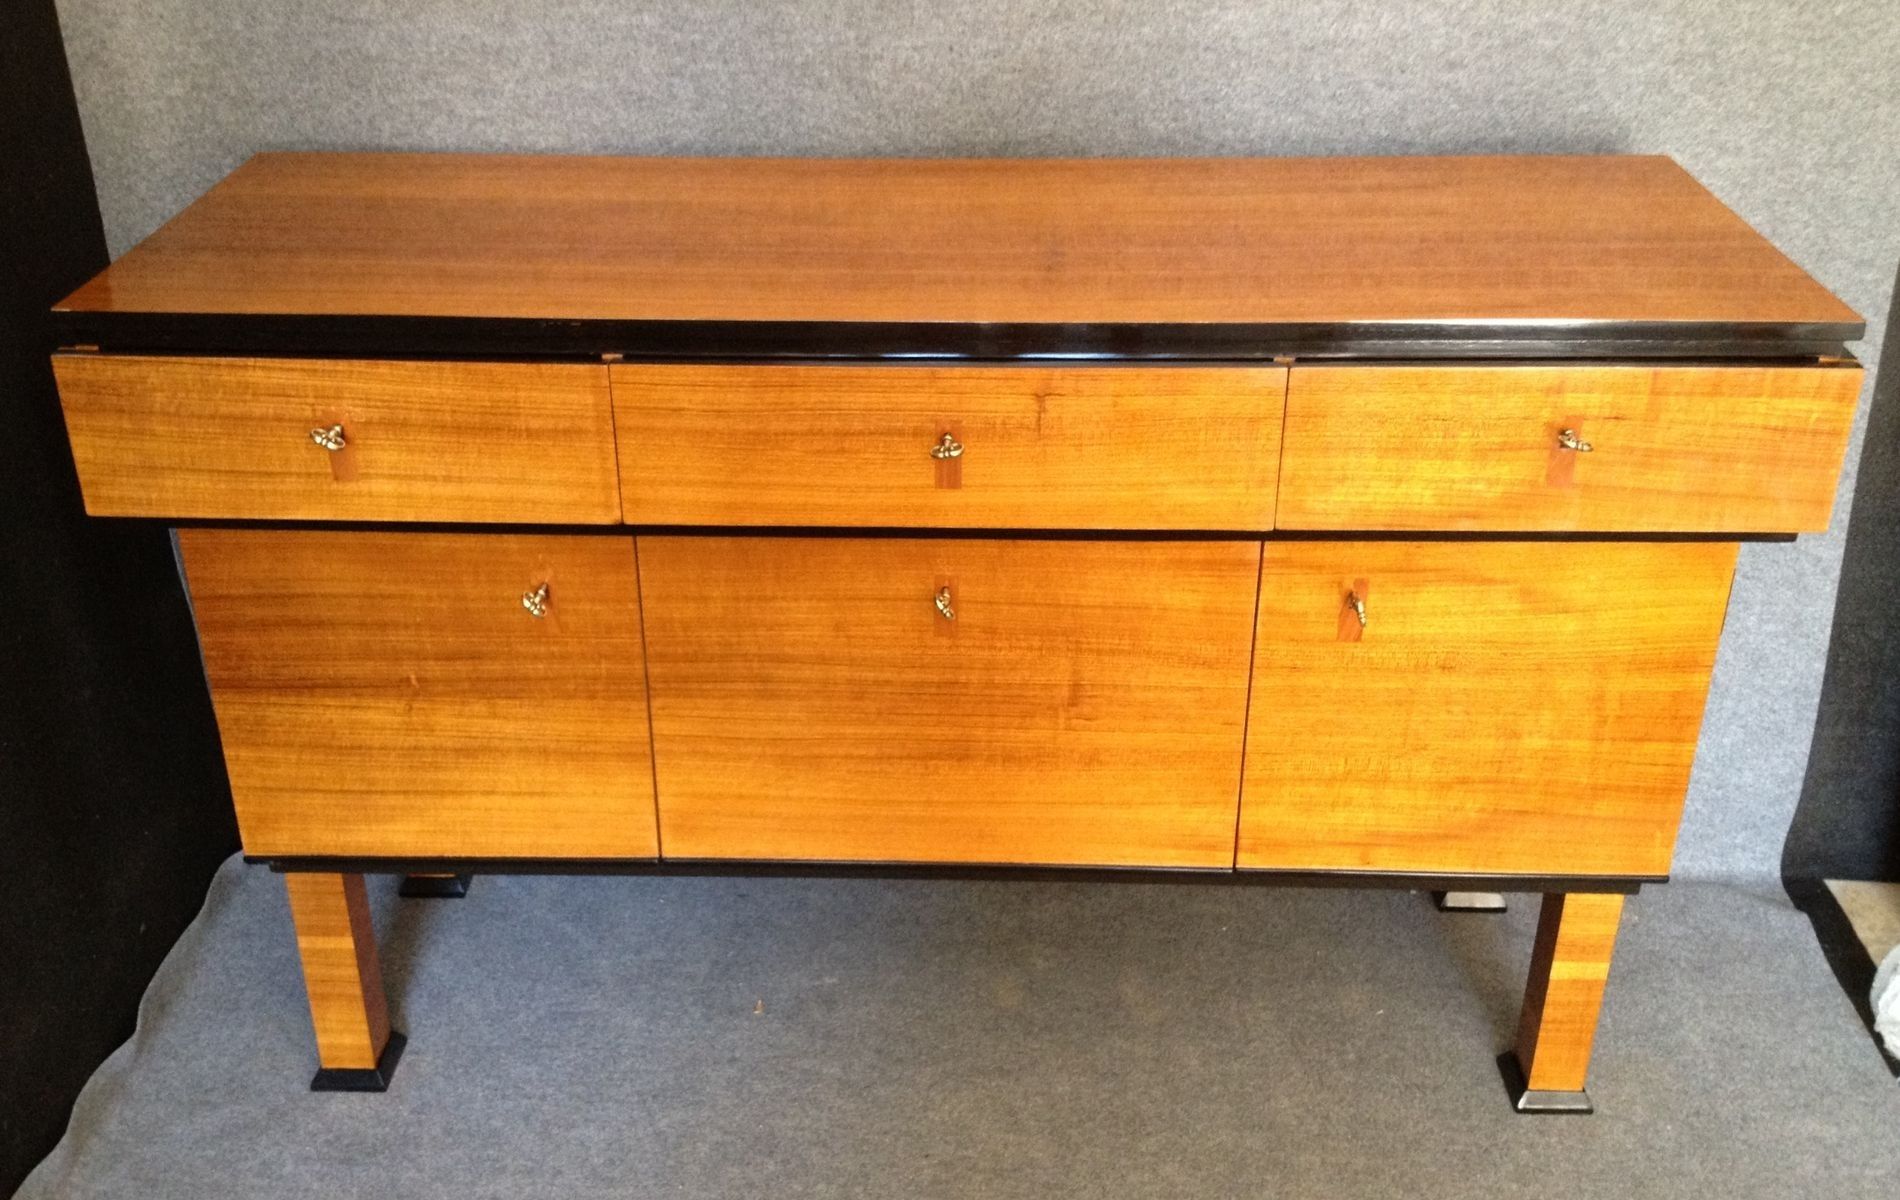 Art Deco Italian Sideboard With Flap Drawer, 1920 For Sale At Pamono Inside Girard 4 Door Sideboards (View 21 of 30)